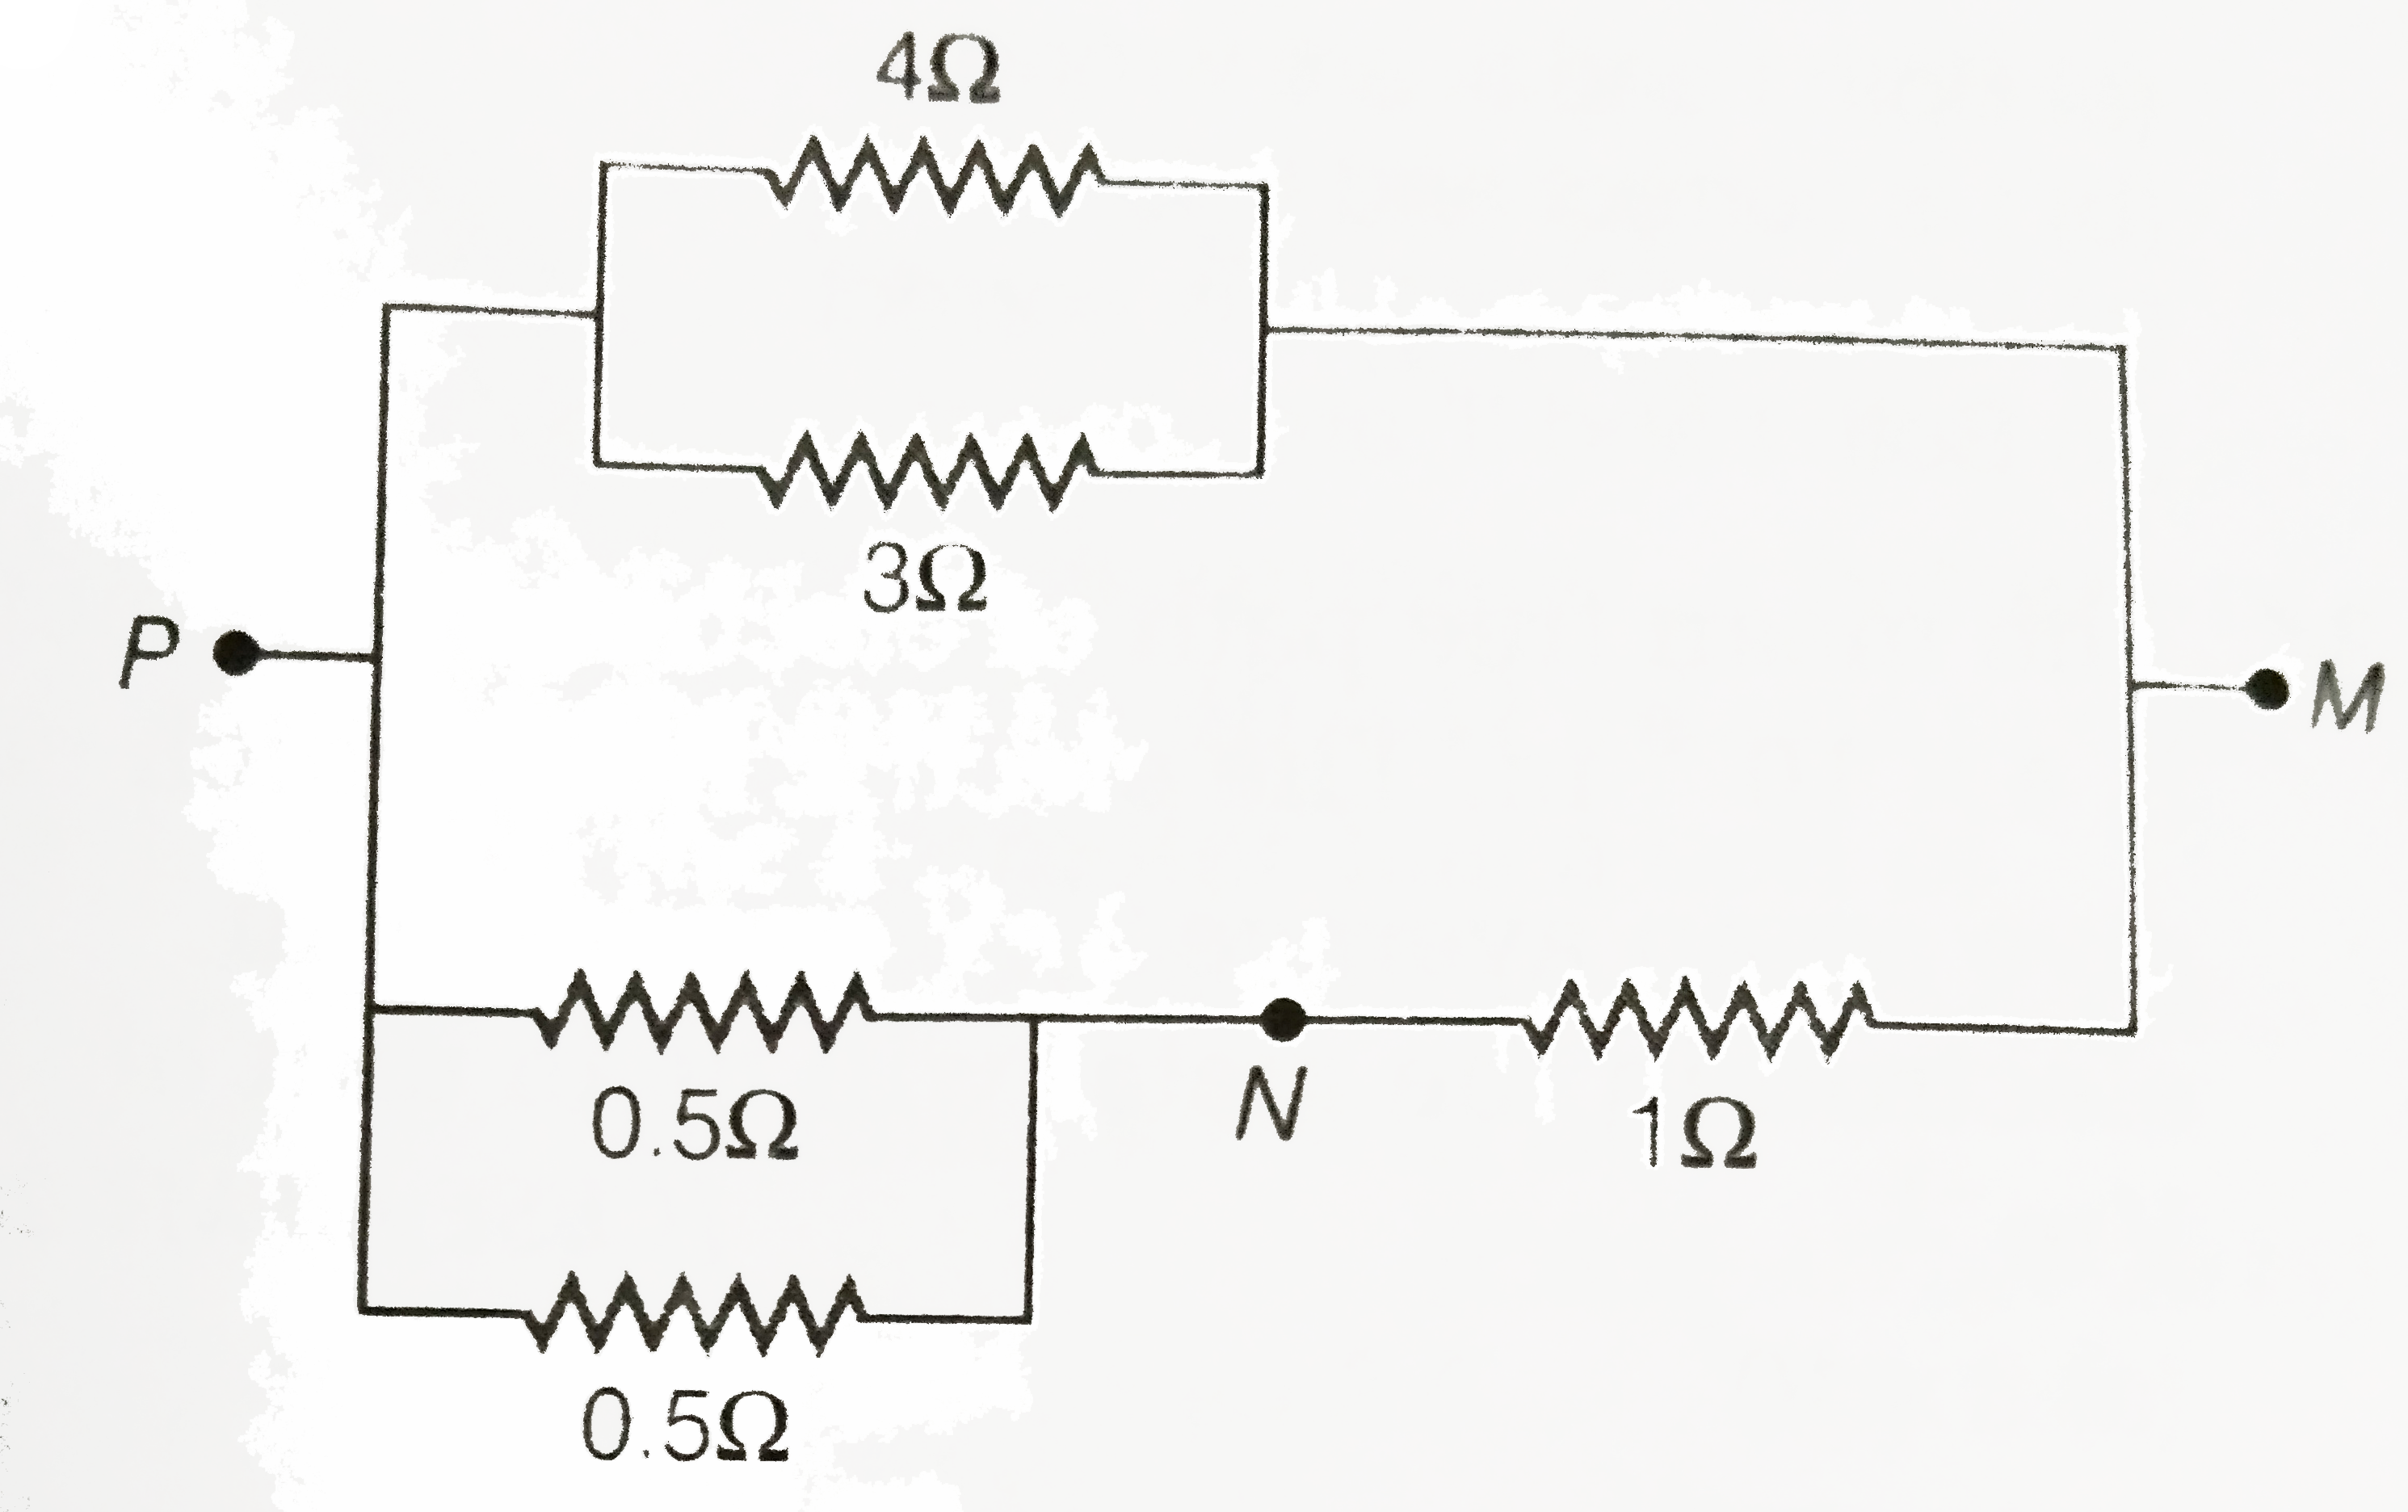 In the circuit shown, the current throuhg the 4Omega resistor is 1A when the points P and M are connected to a DC voltage source. The potential difference between the points M and N is